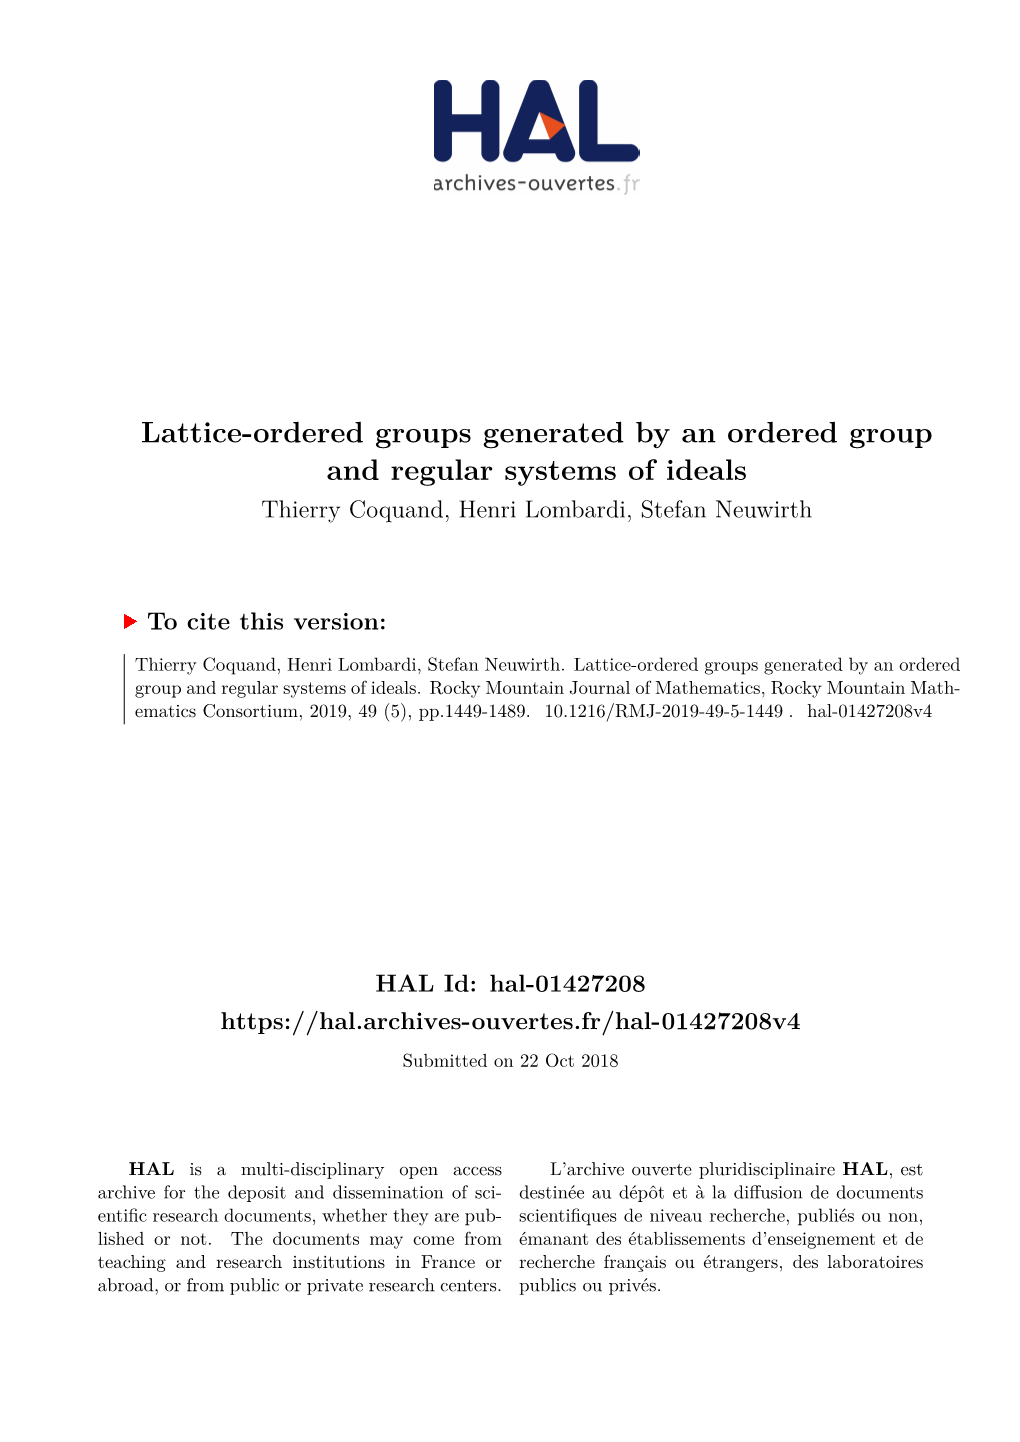 Lattice-Ordered Groups Generated by an Ordered Group and Regular Systems of Ideals Thierry Coquand, Henri Lombardi, Stefan Neuwirth